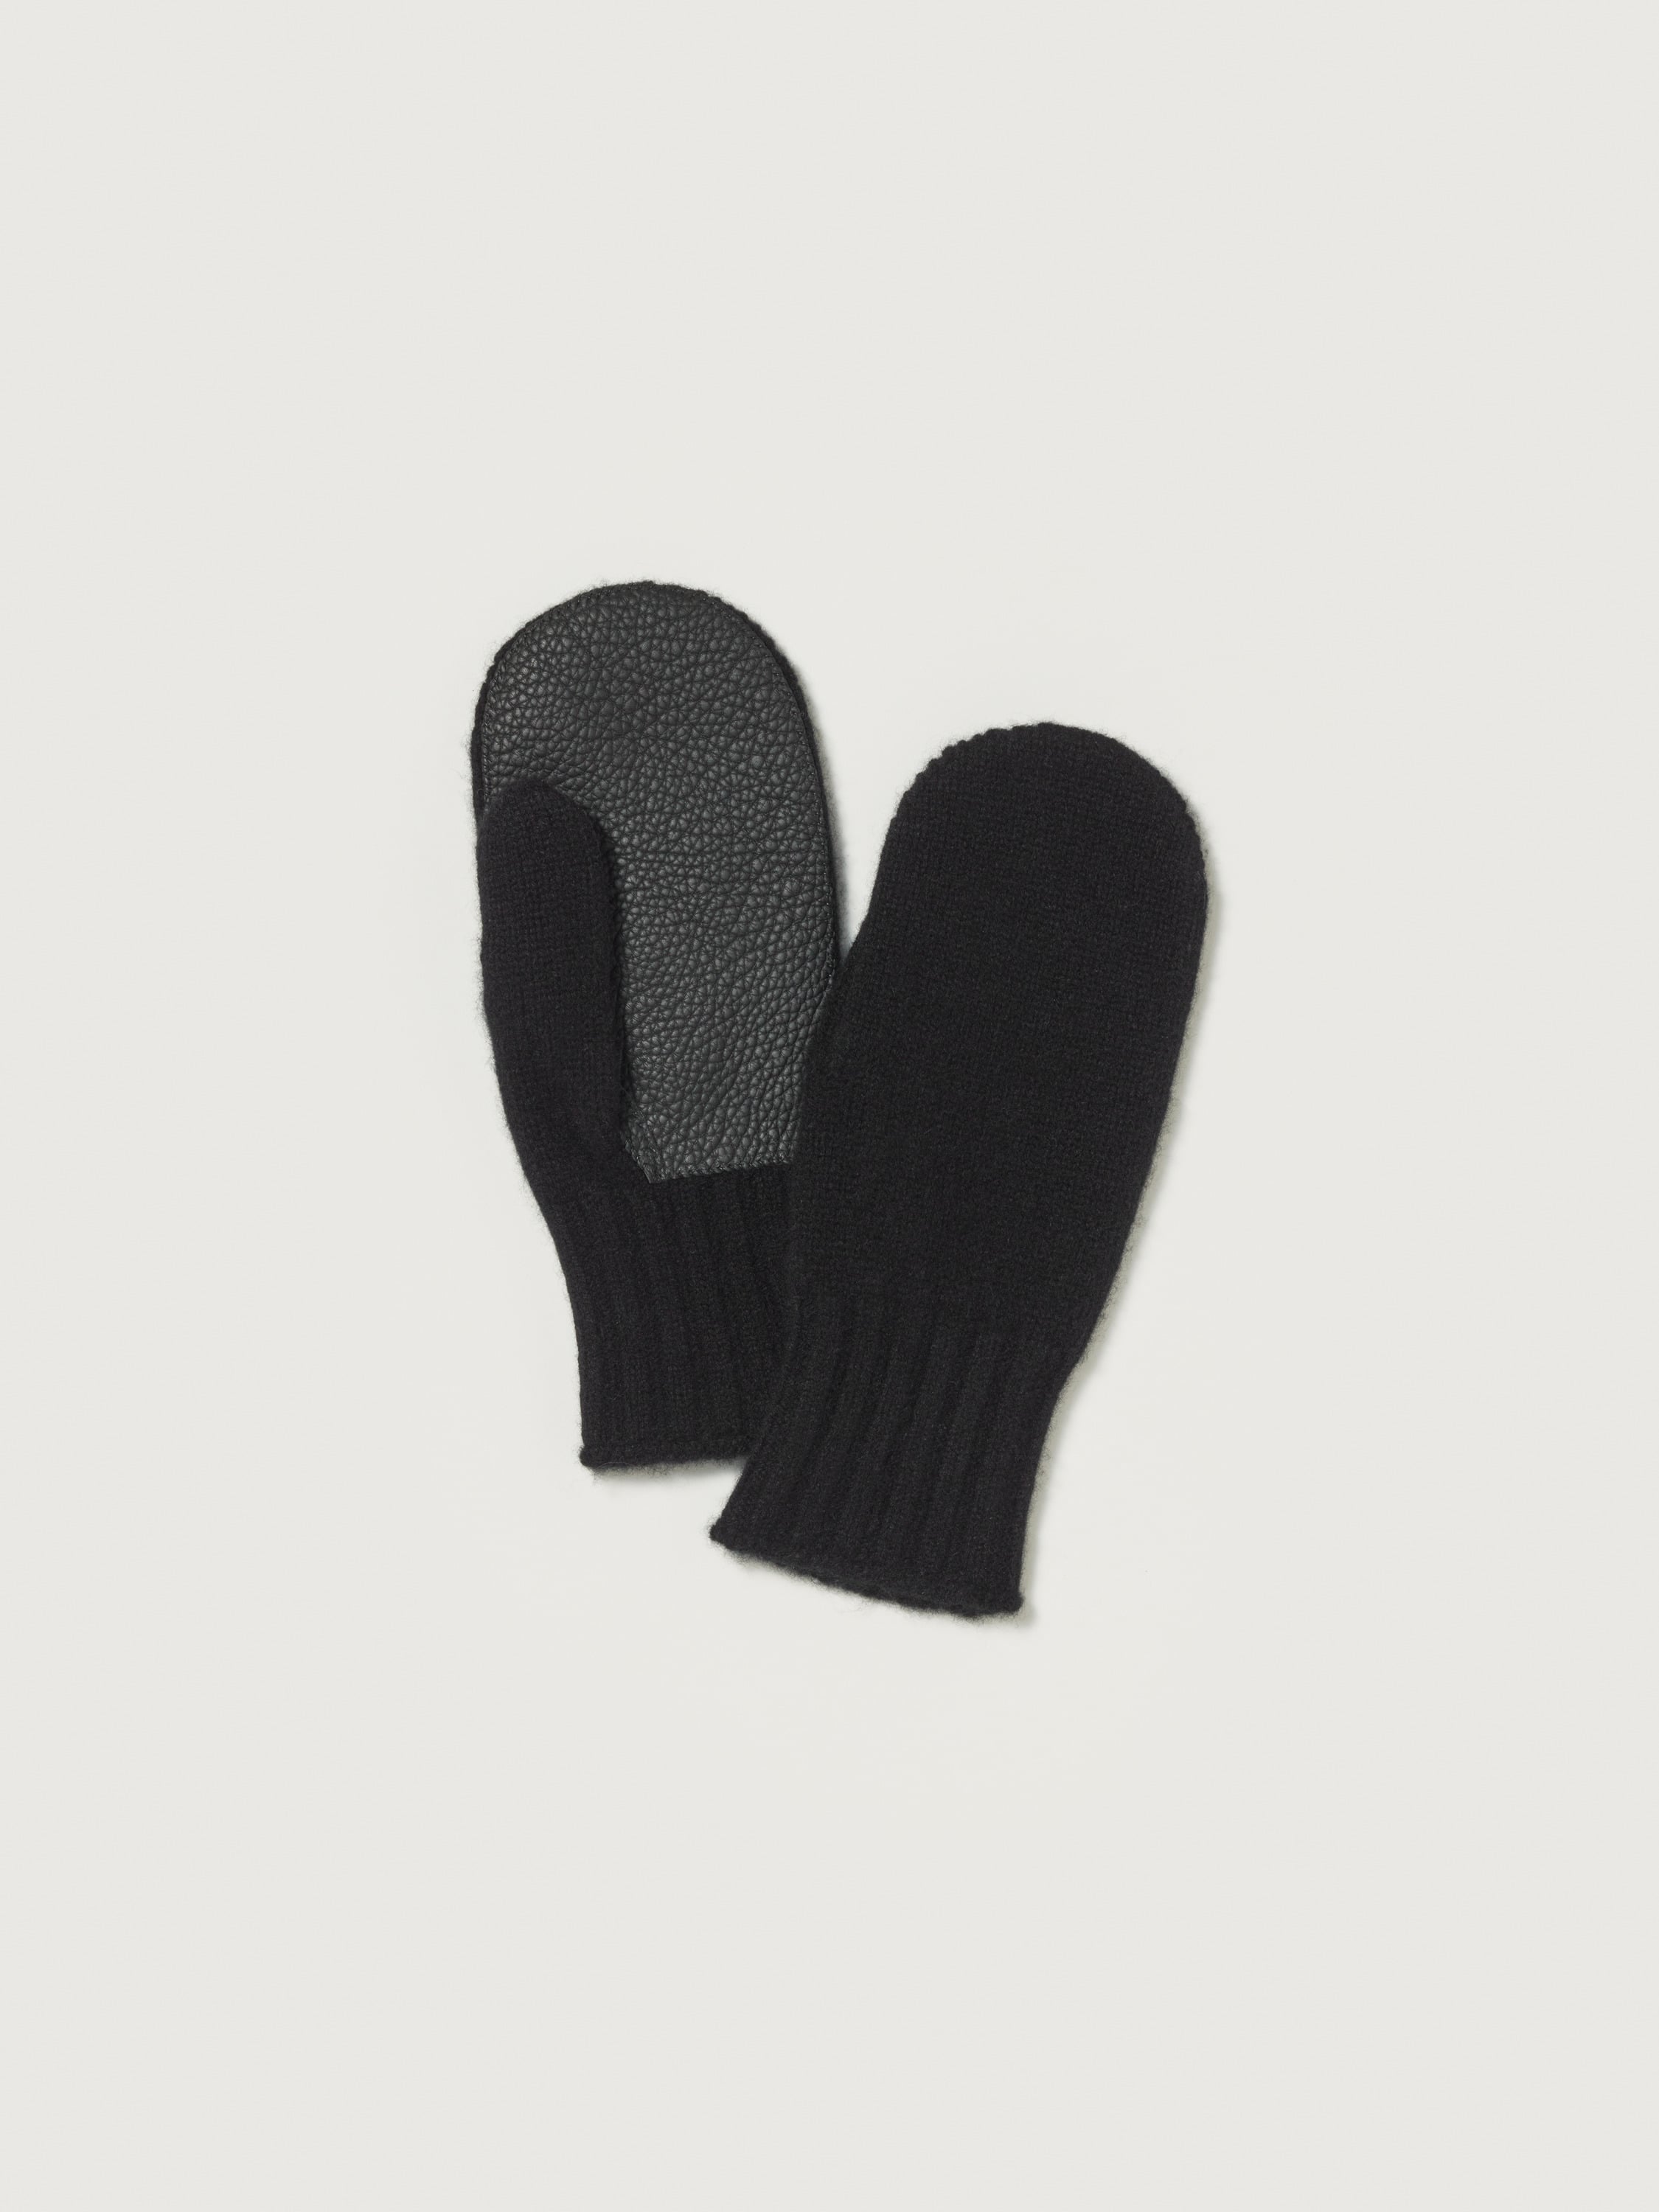 BABY CASHMERE KNIT LEATHER GLOVES 詳細画像 TOP BLACK 1